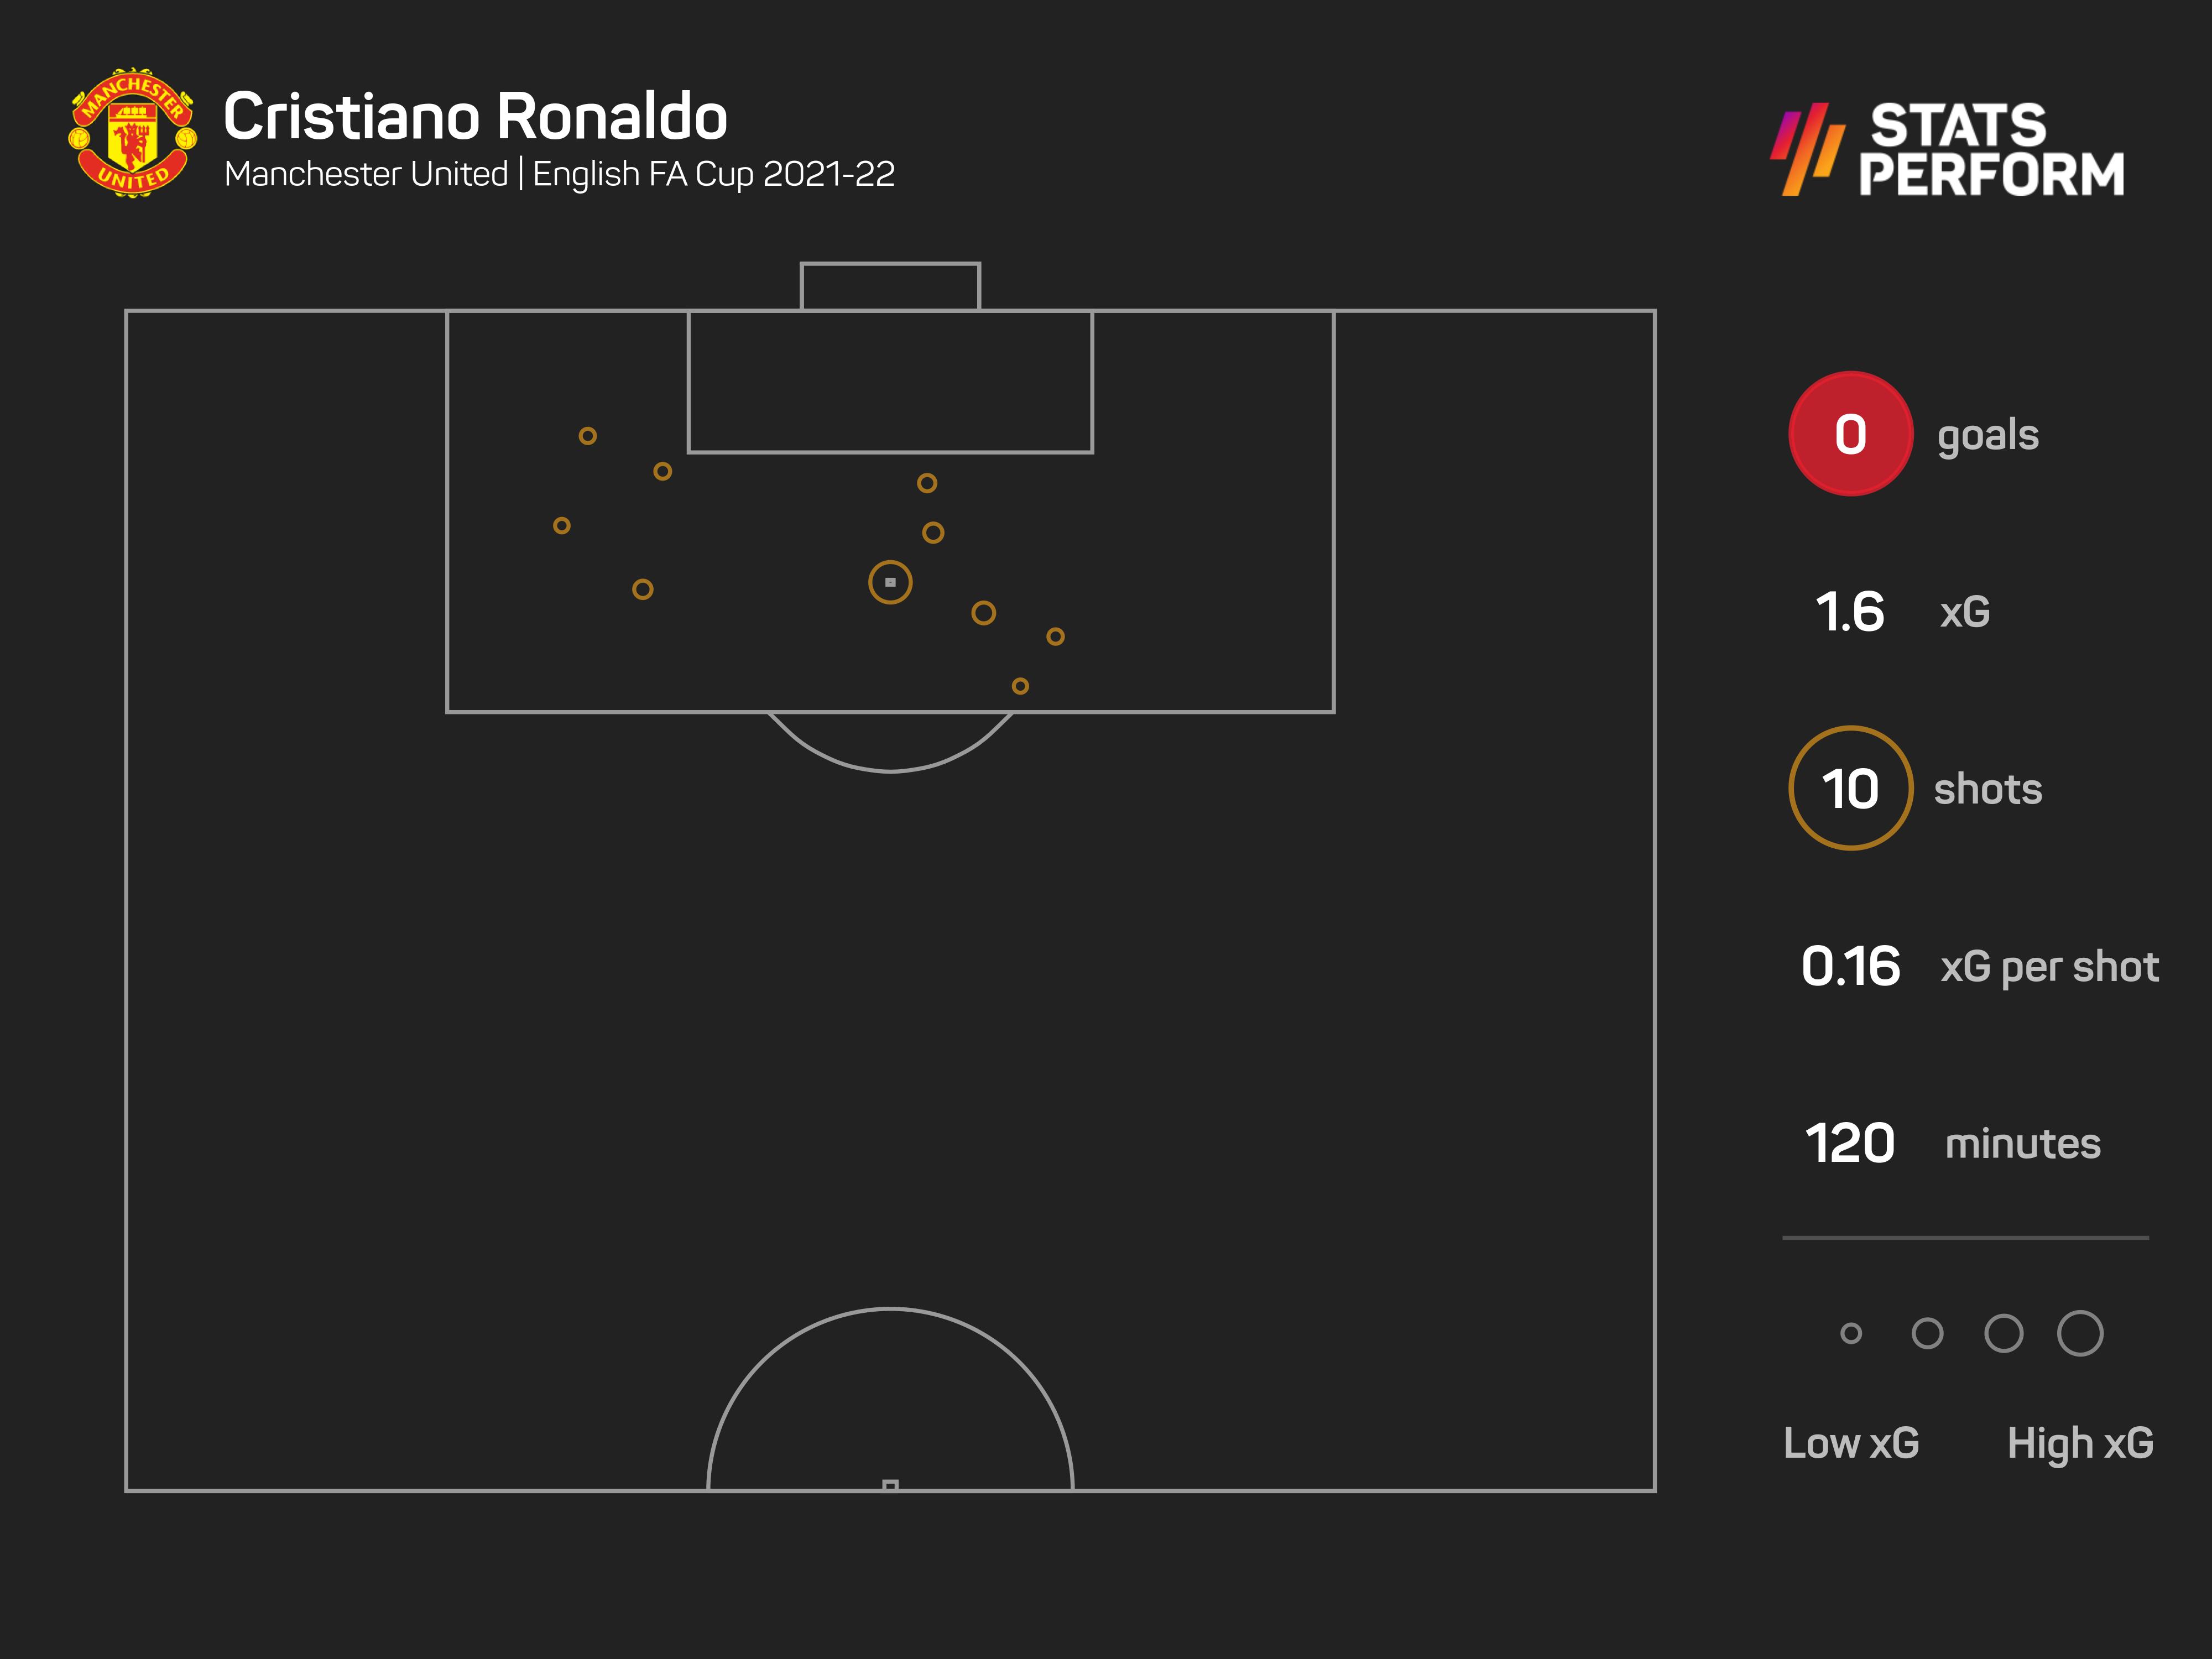 Cristiano Ronaldo had 10 attempts against Middlesbrough